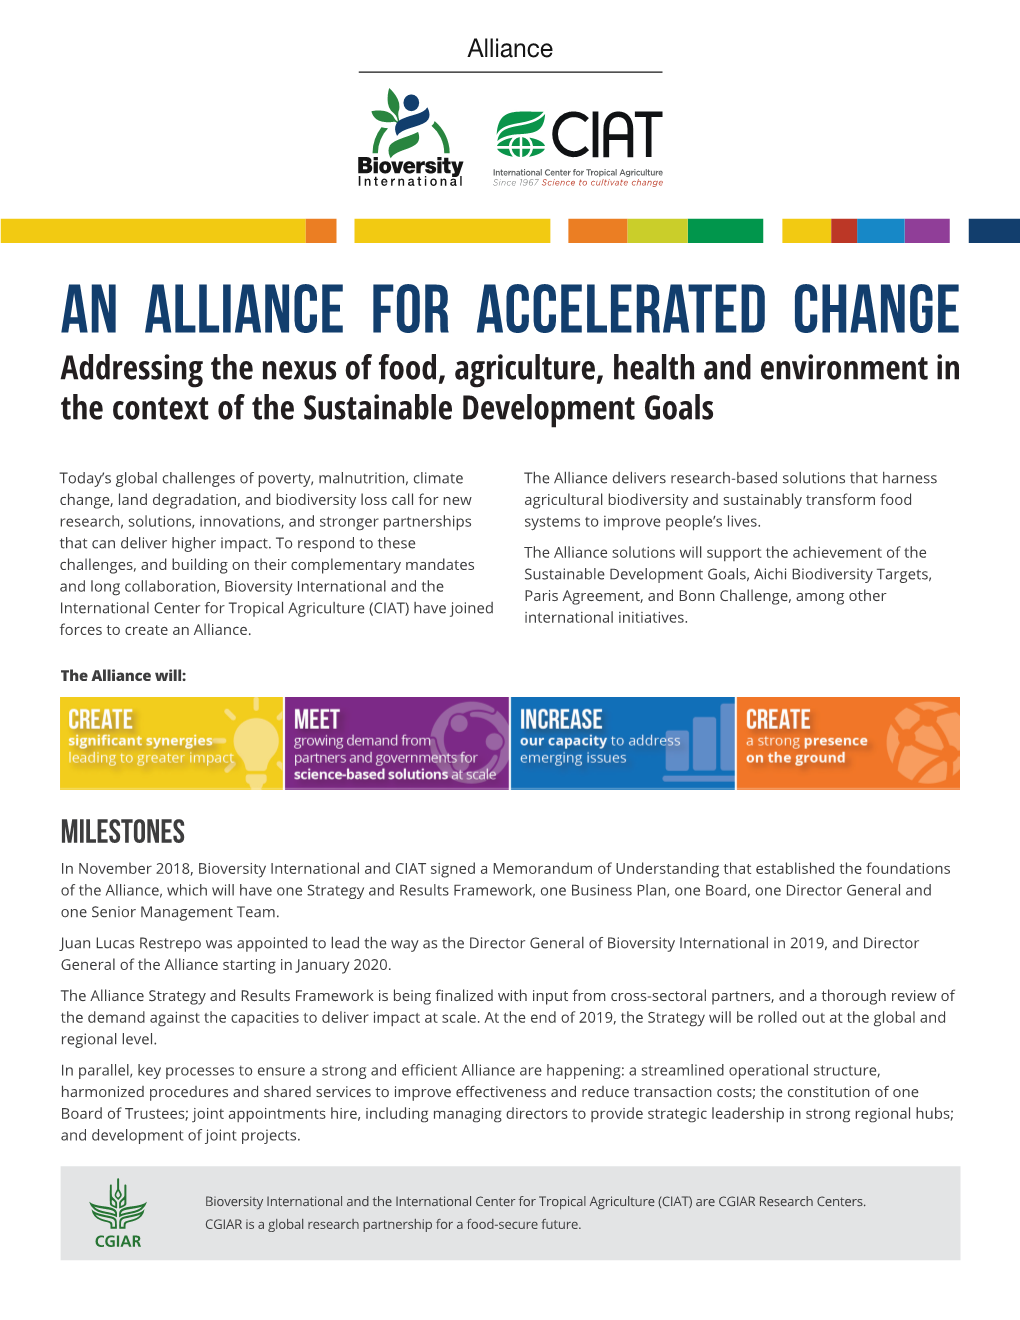 An Alliance for Accelerated Change Addressing the Nexus of Food, Agriculture, Health and Environment in the Context of the Sustainable Development Goals